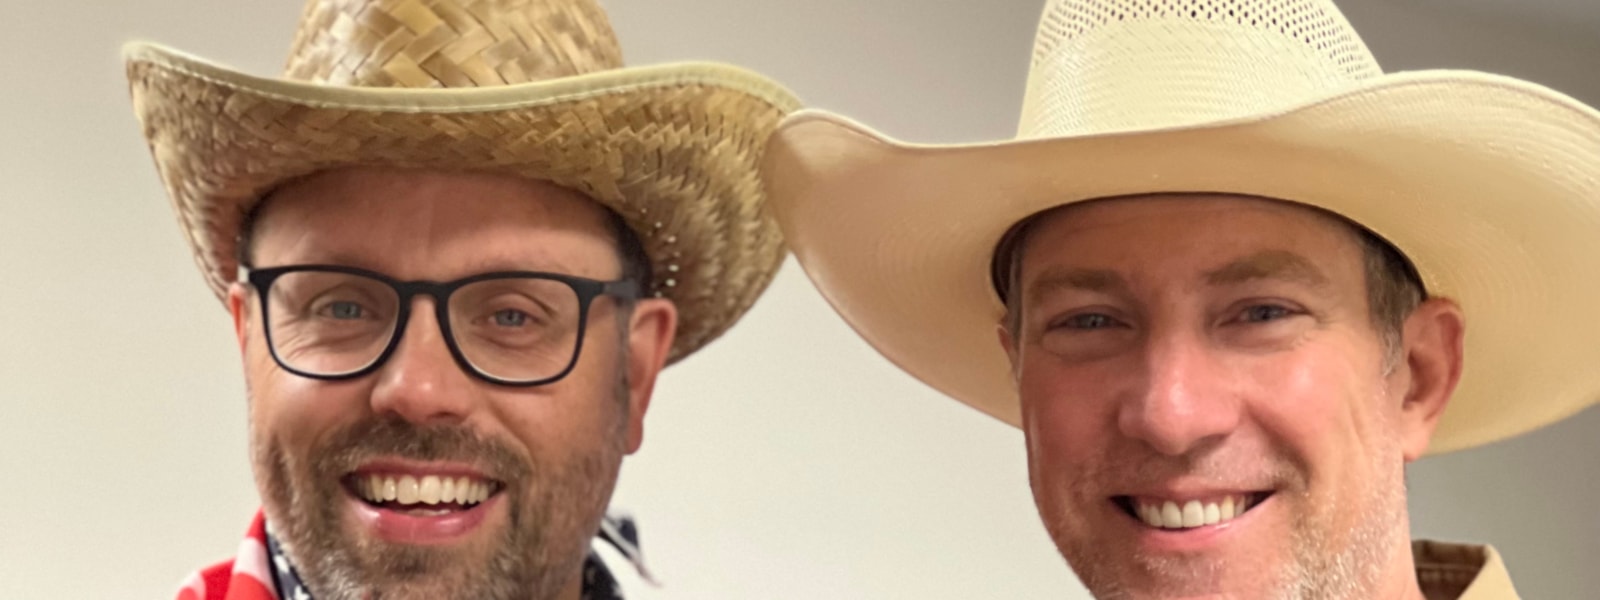 Picture of Mr. Moore and Mr. Offi wearing cowboy hats